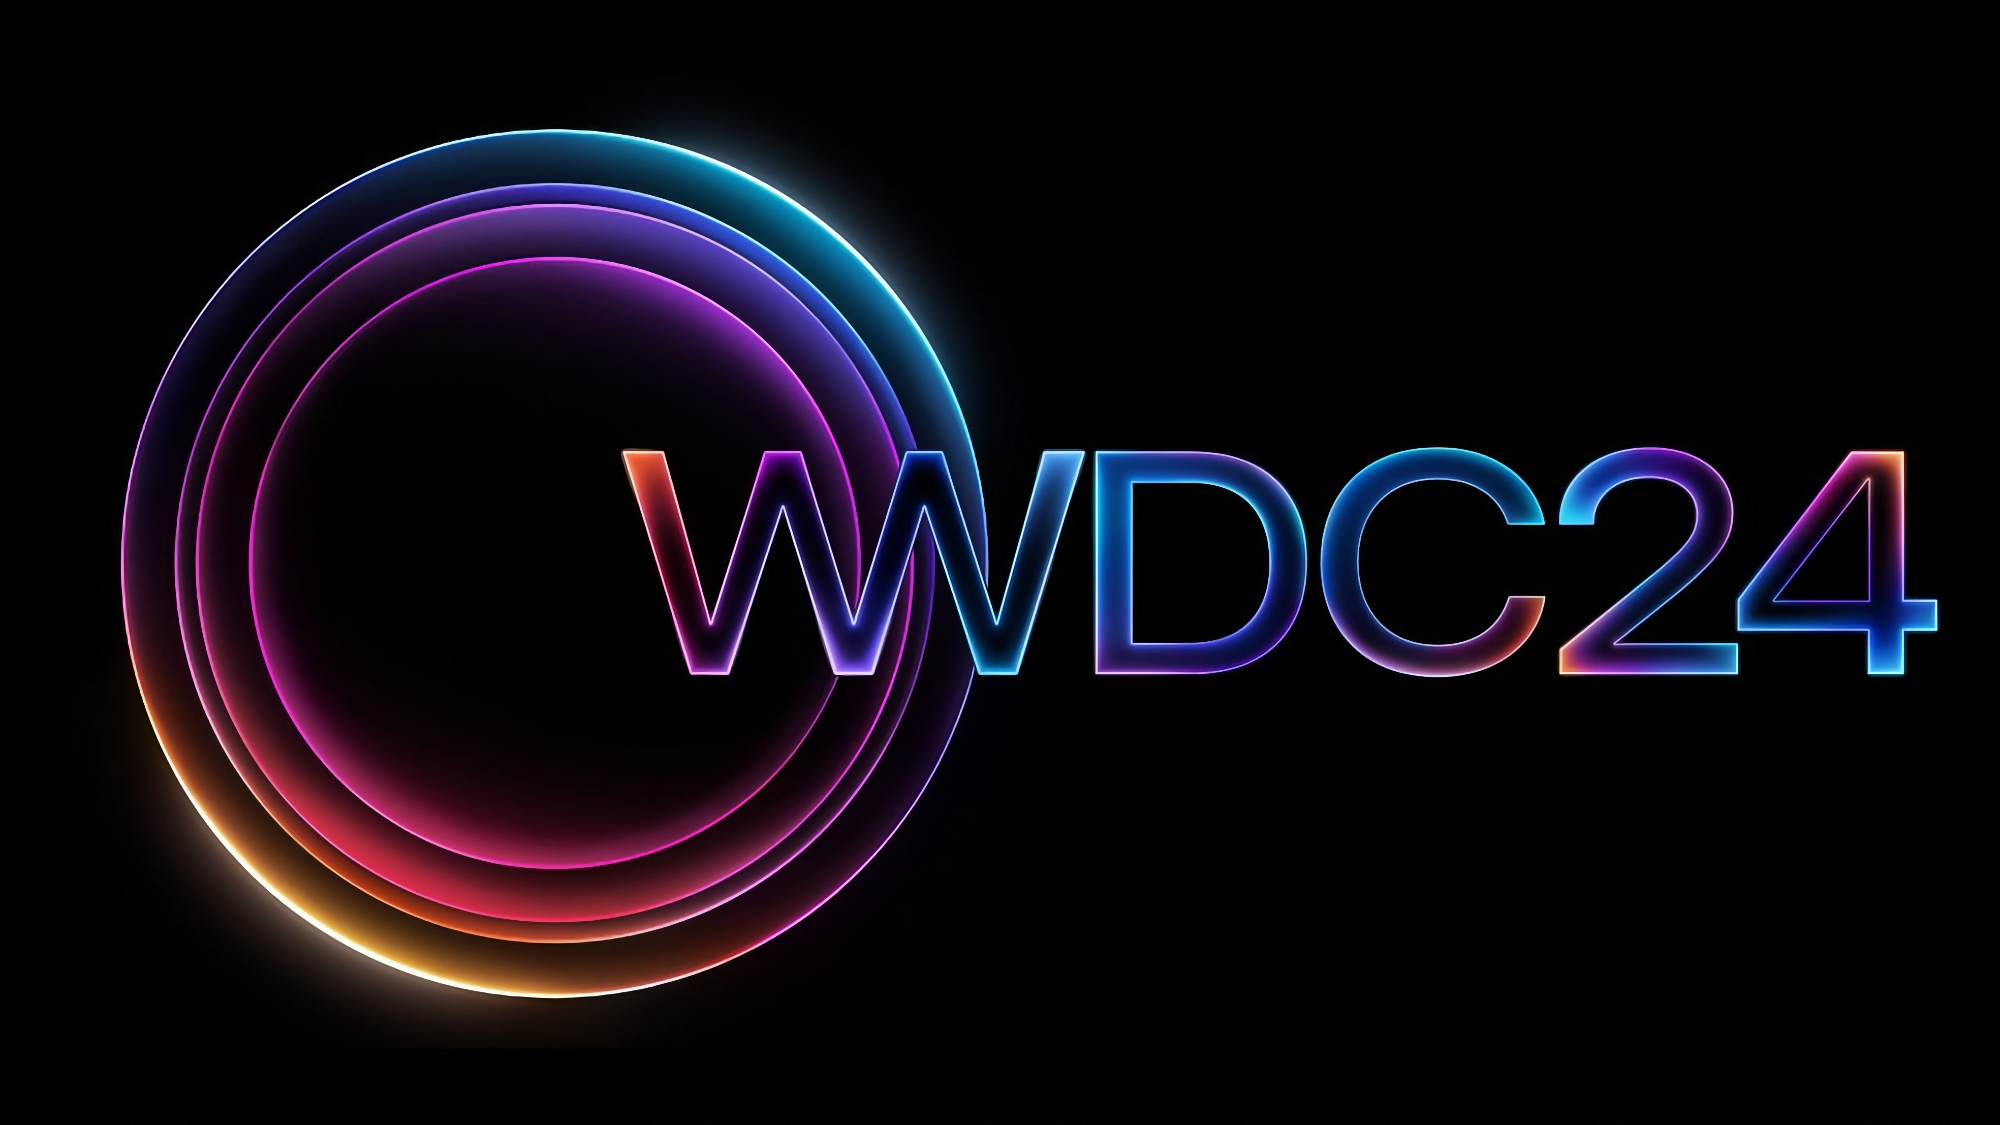 Bloomberg Apple won't show new gadgets at WWDC 2024